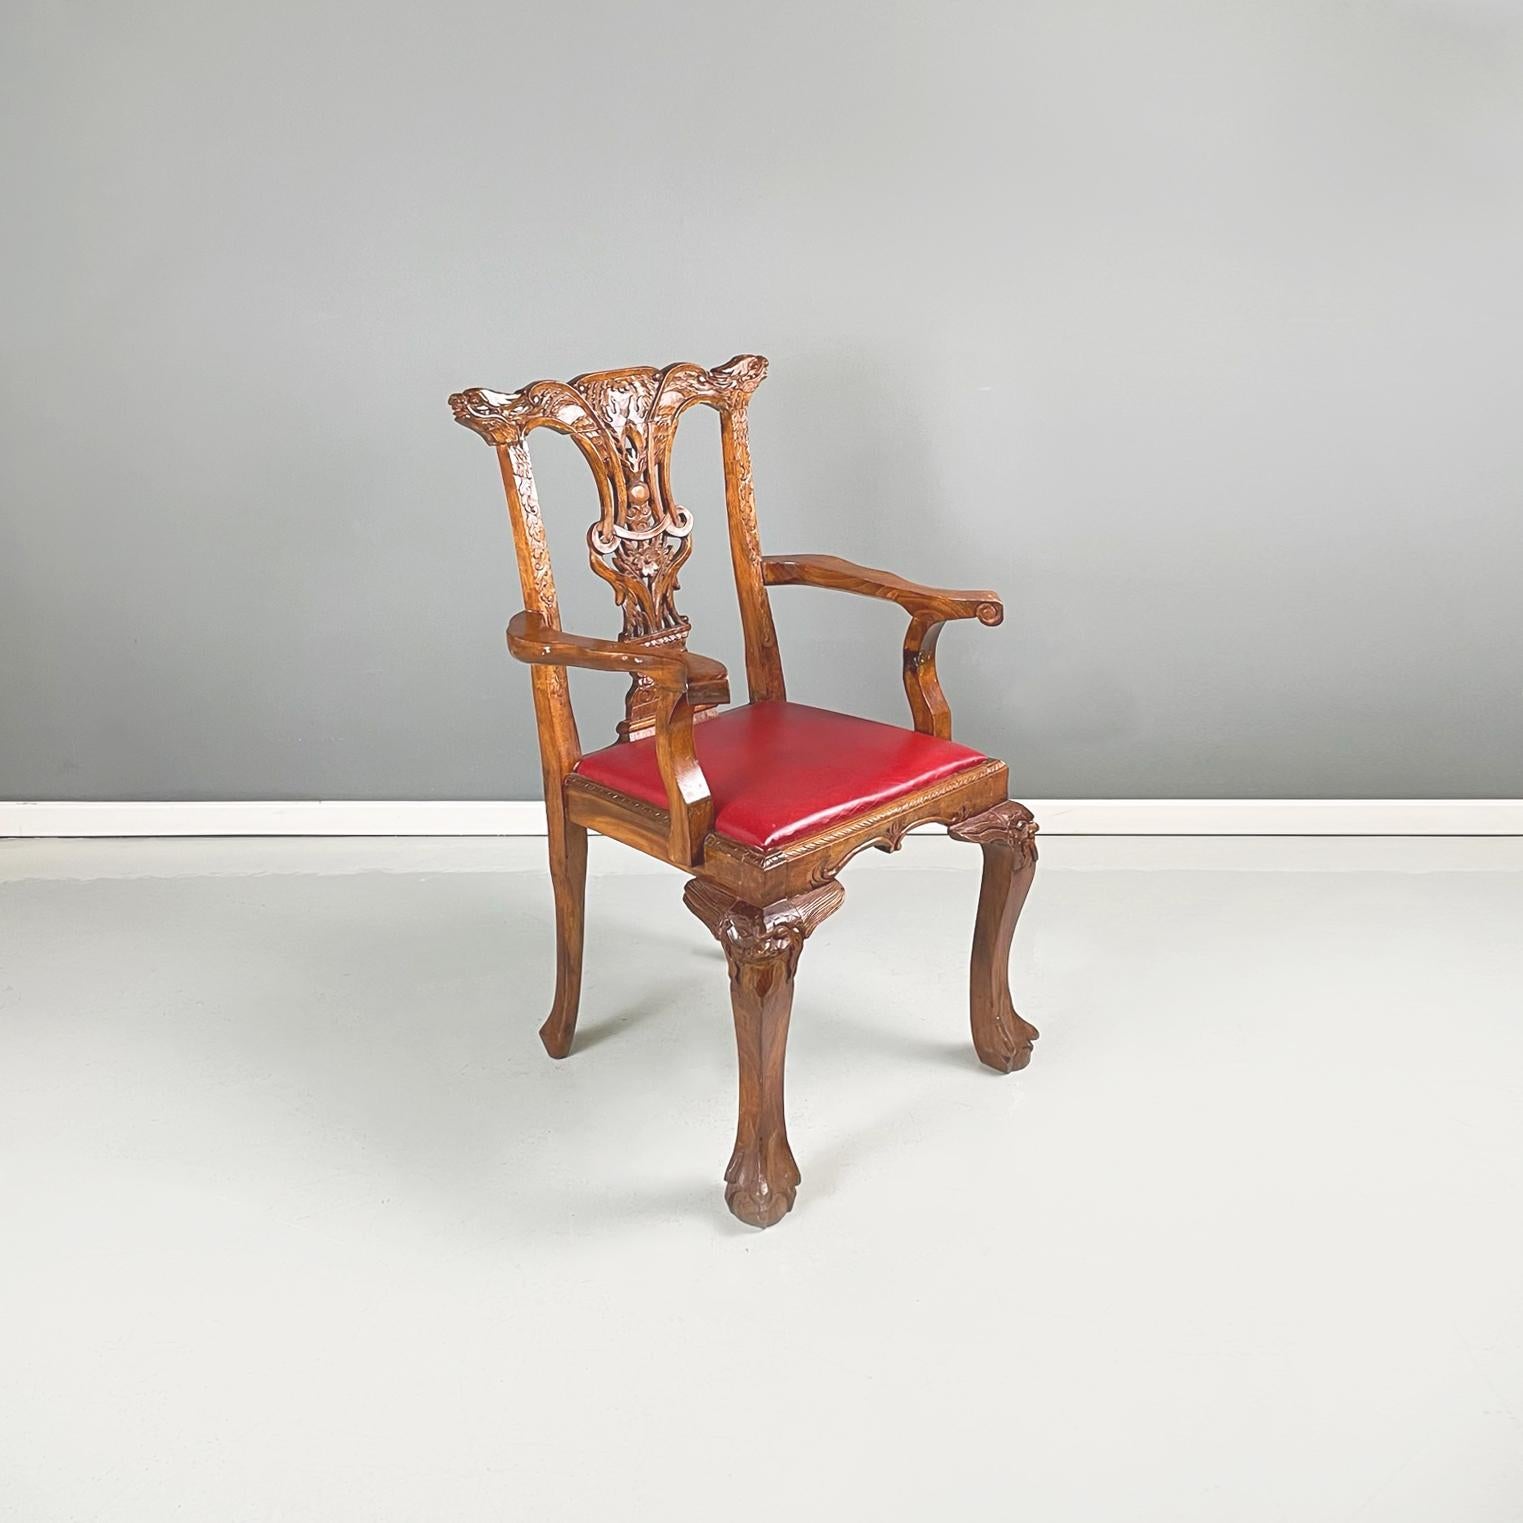 Chippendale style Wooden chairs with red leather, early 1900s
Pair of chairs with finely worked wooden structure. The square seat is padded and upholstered in red leather. The backrest is decorated with flowers and dragon. The curved wooden